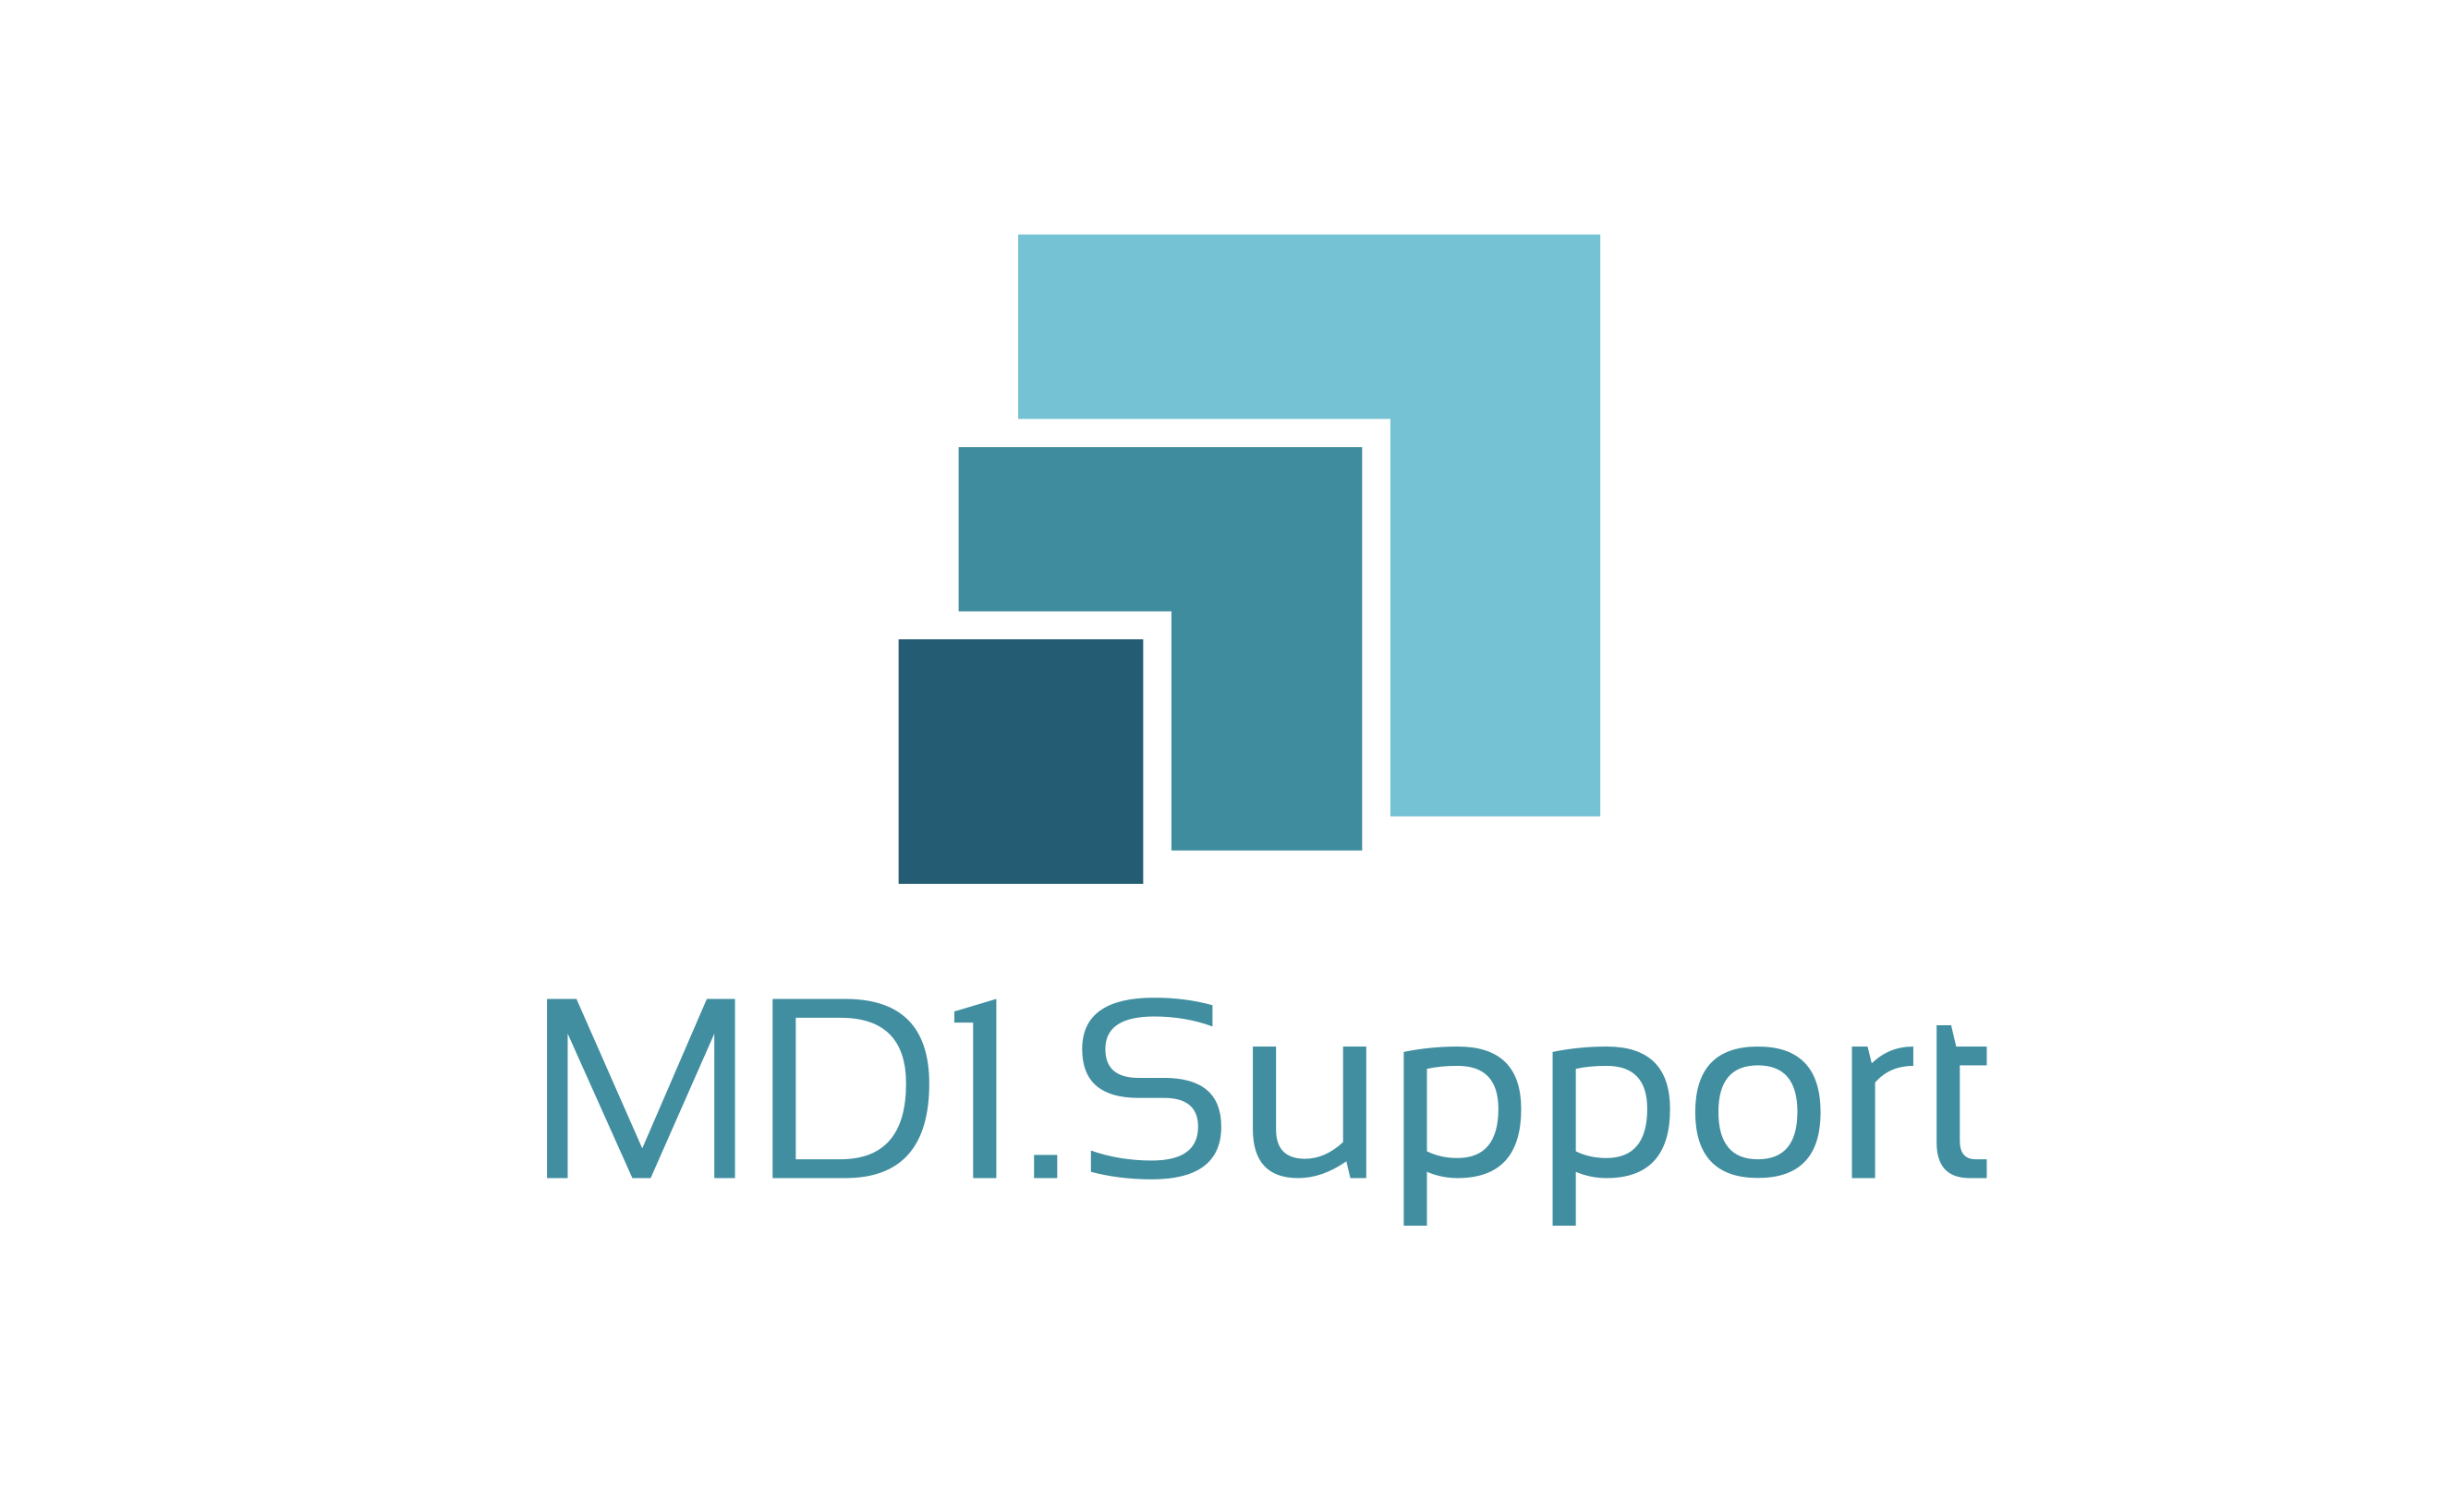 MD1 Support